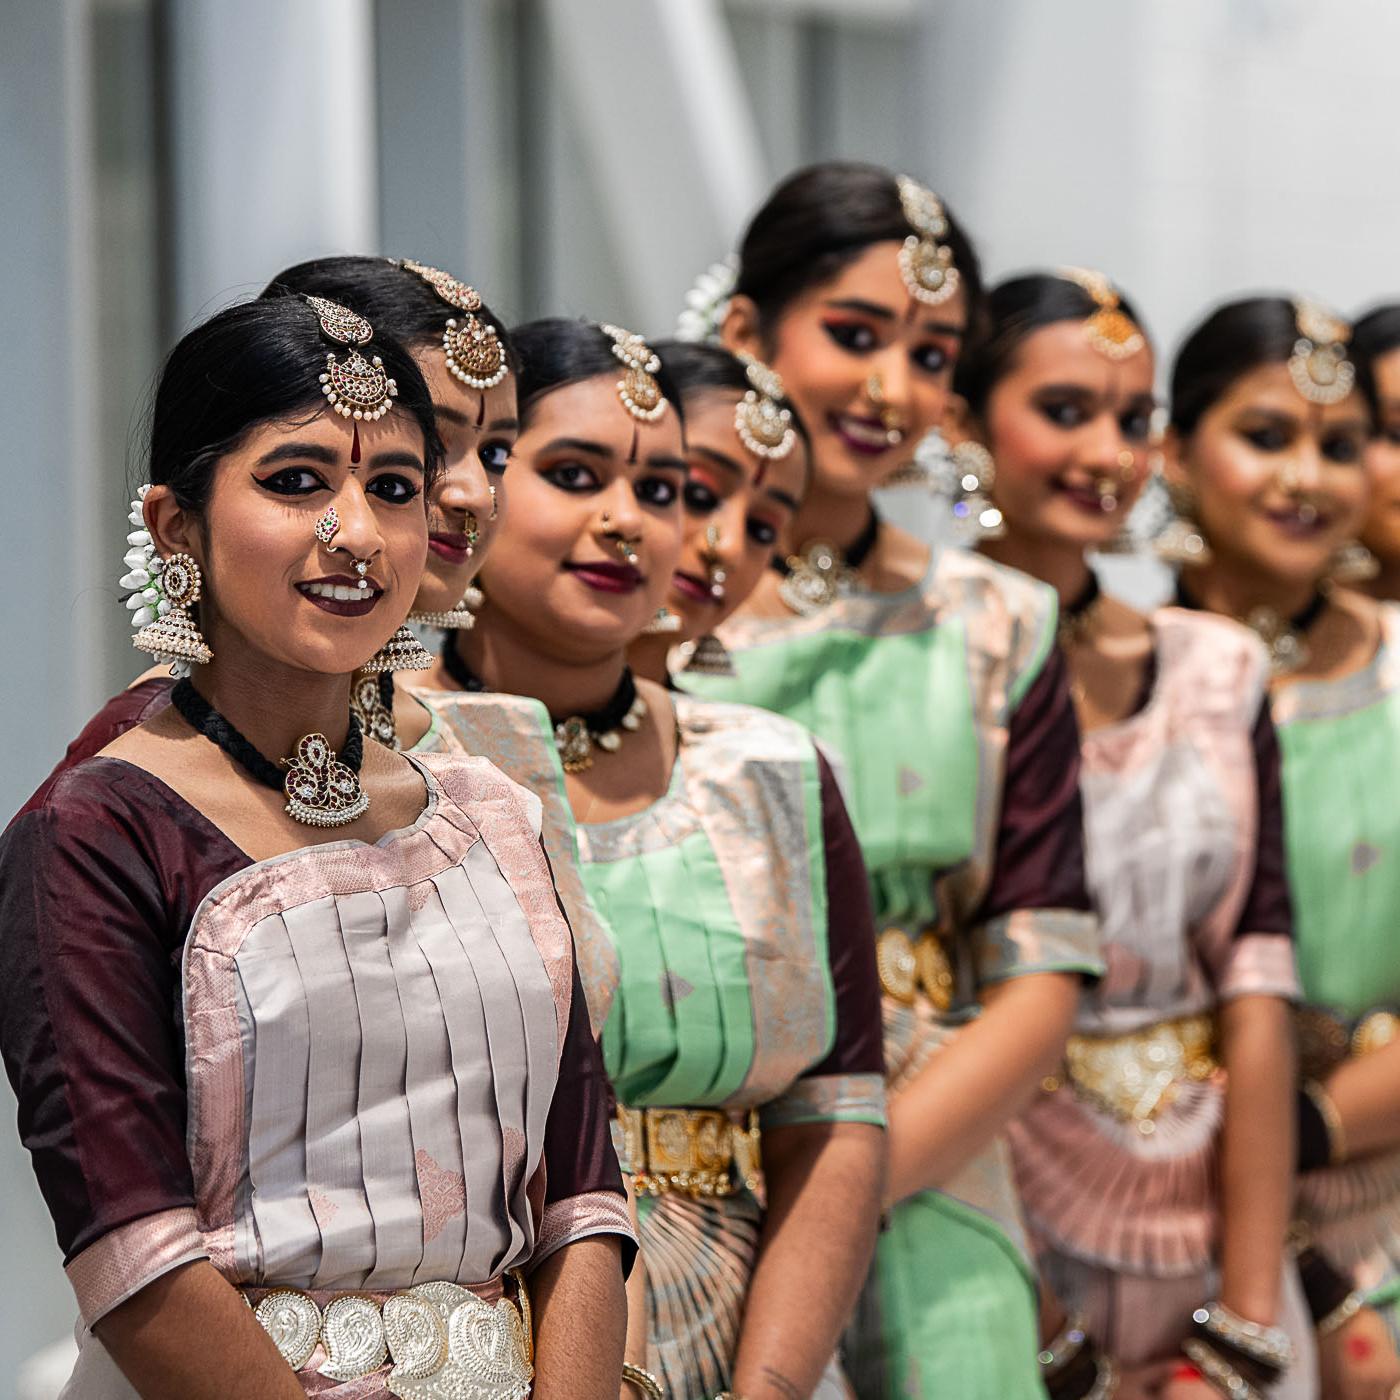 a row of colourfully dressed dancers in traditional outfits, looking at the camera